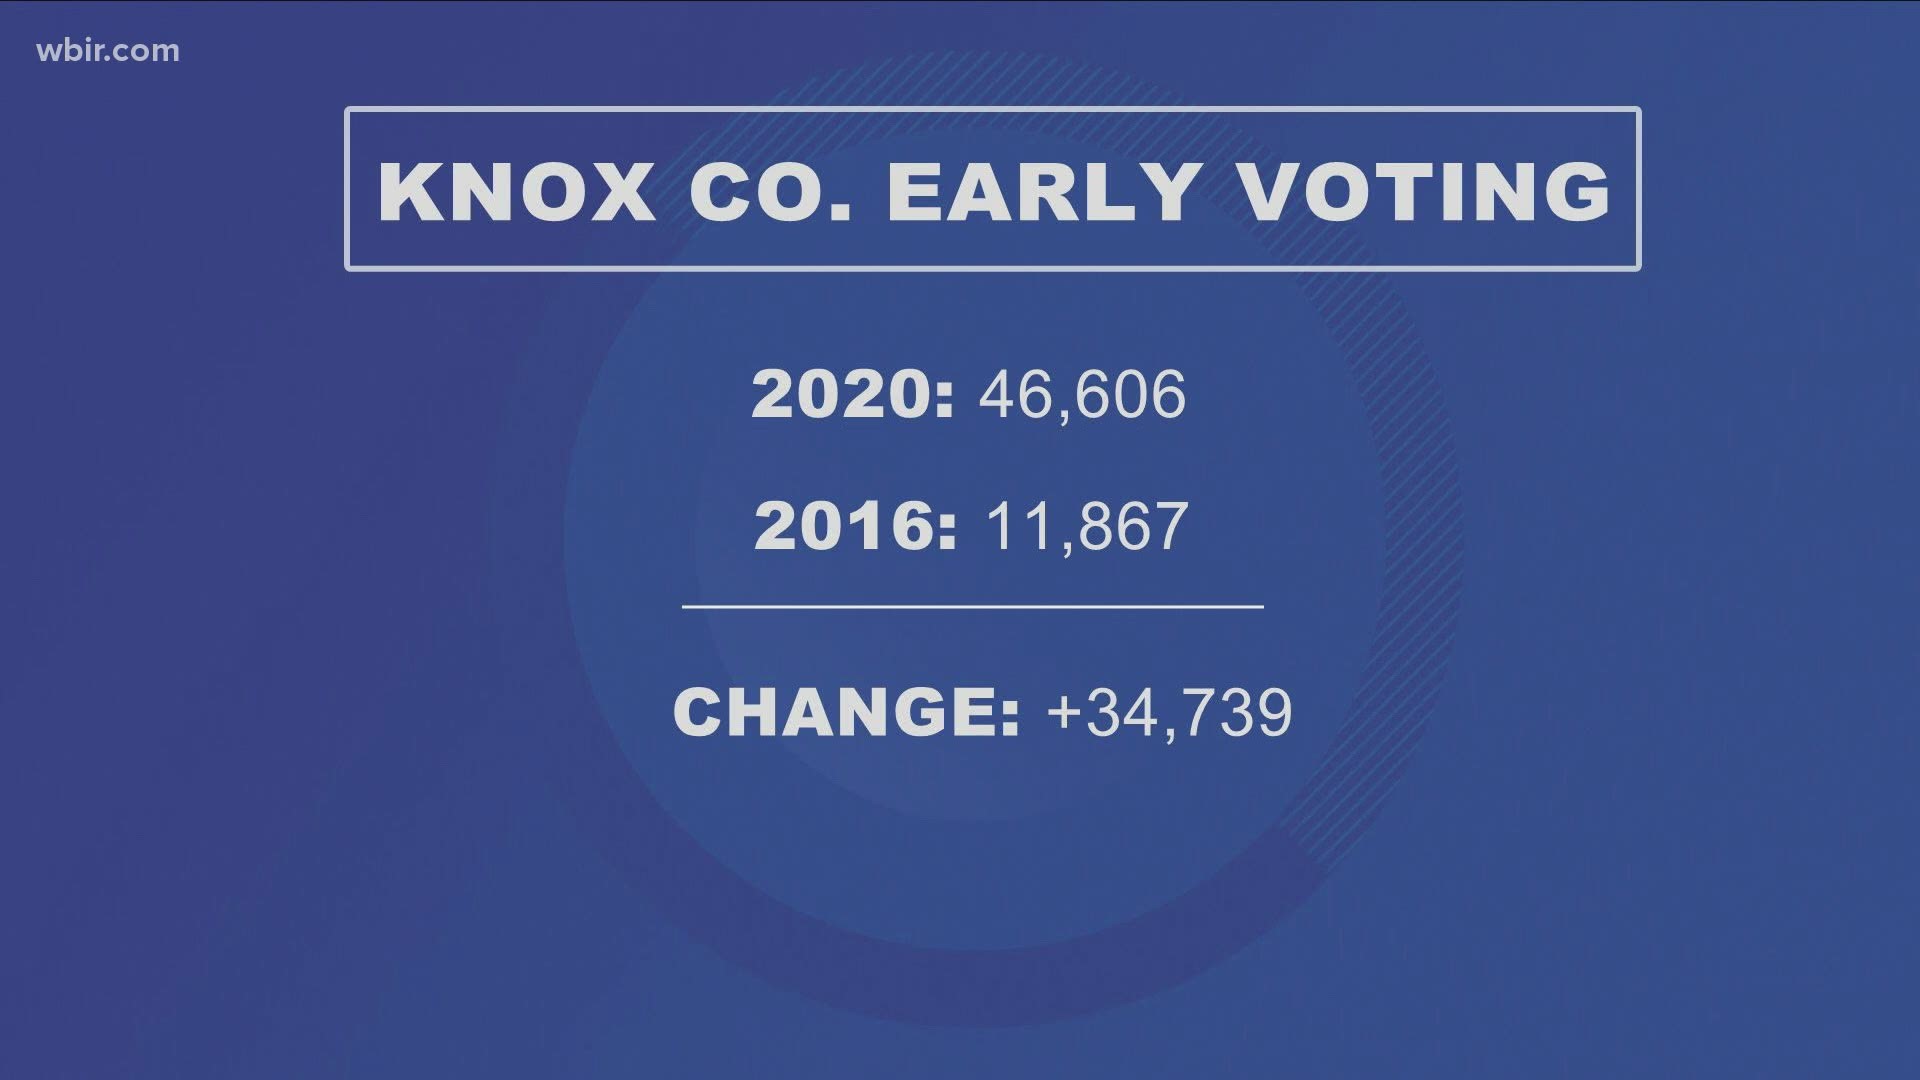 Less than a week away from Election Day, nearly 34,00 more people voted early in Knox County compared to the August 2016 election.